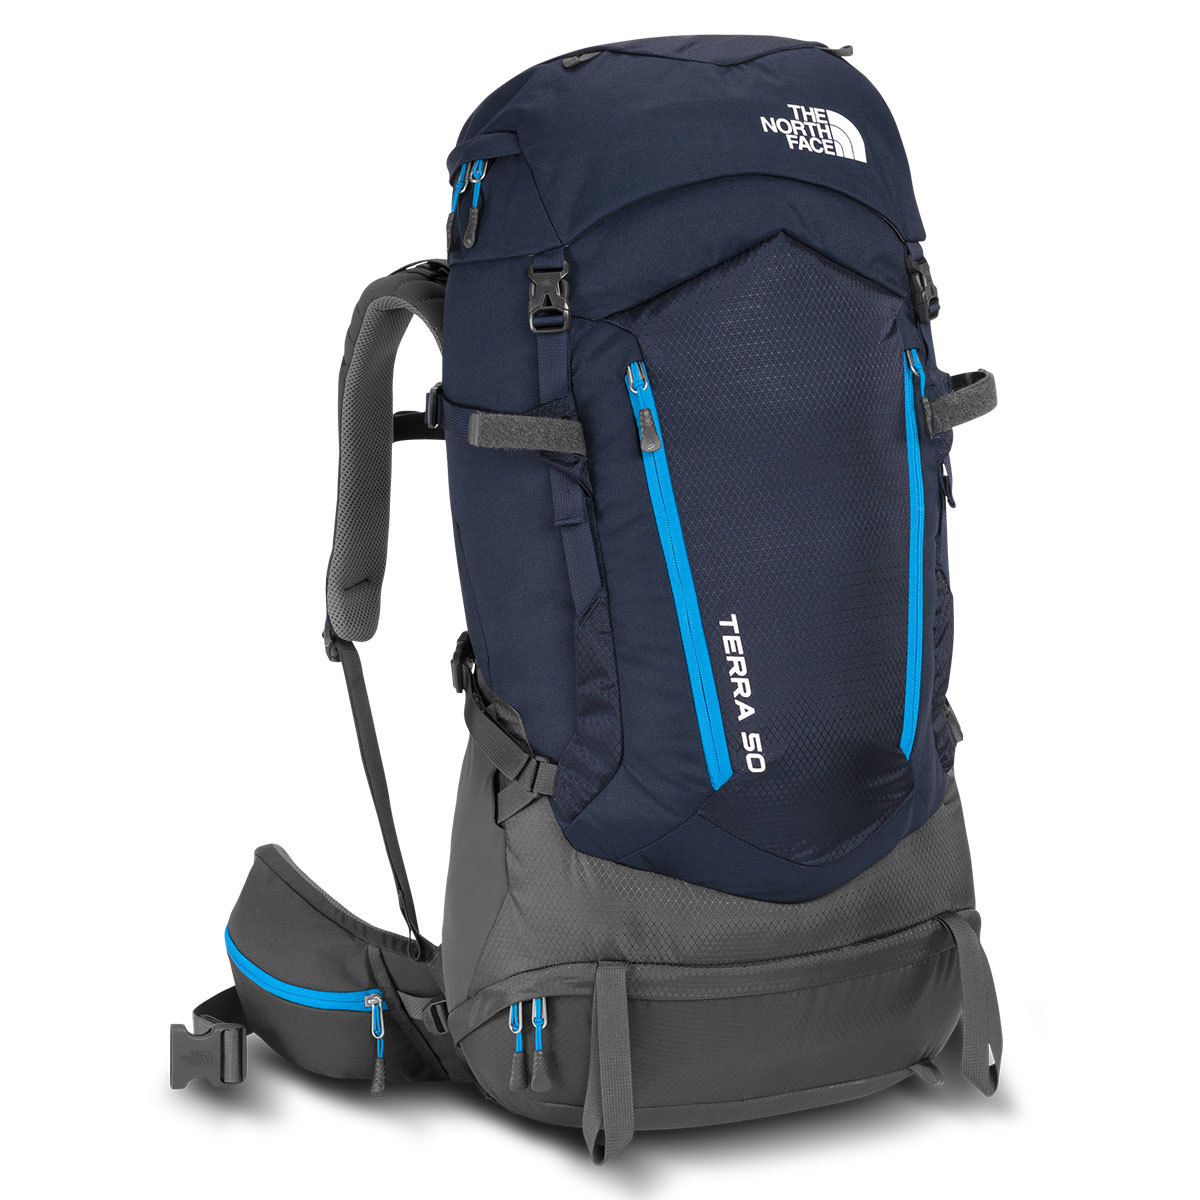 THE NORTH FACE Terra 50 Backpack